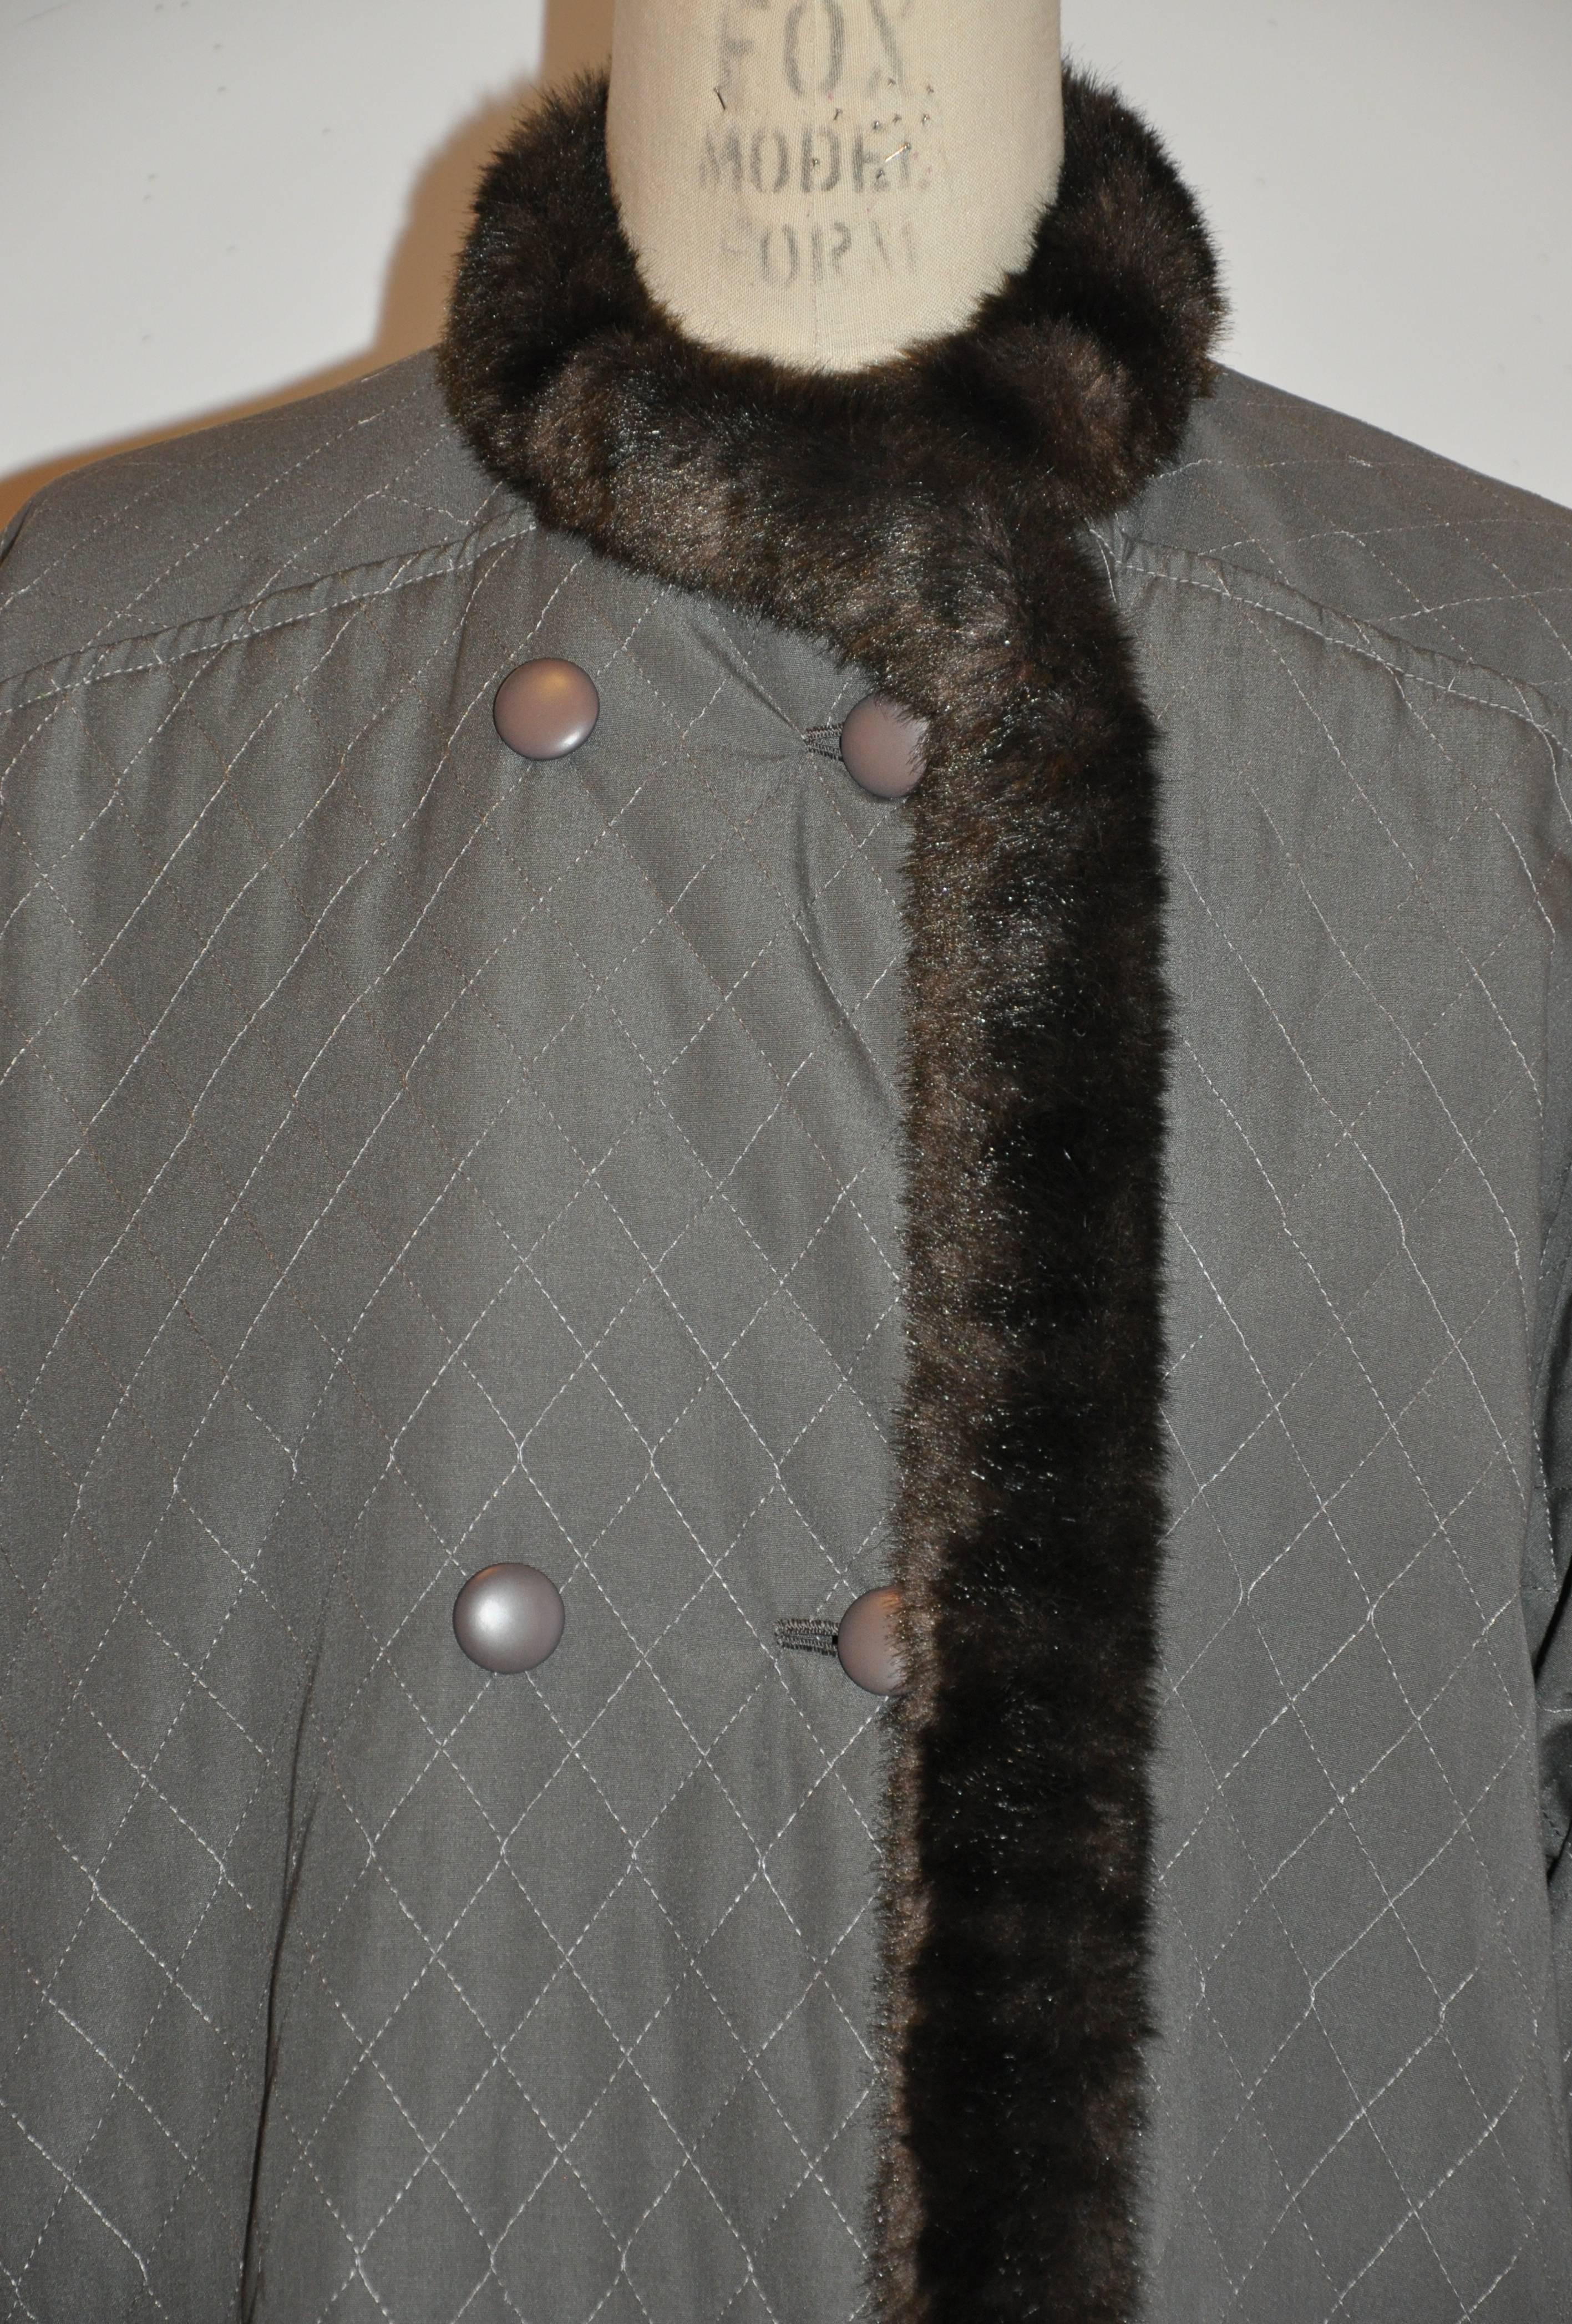            Givenchy's wonderfully detailed olive green quilted flared coat is feather-lightweight, accented with faux fur in coco-brown appearing to be mink in appearance. The double-breasted from is actually single breasted with two deep set-in